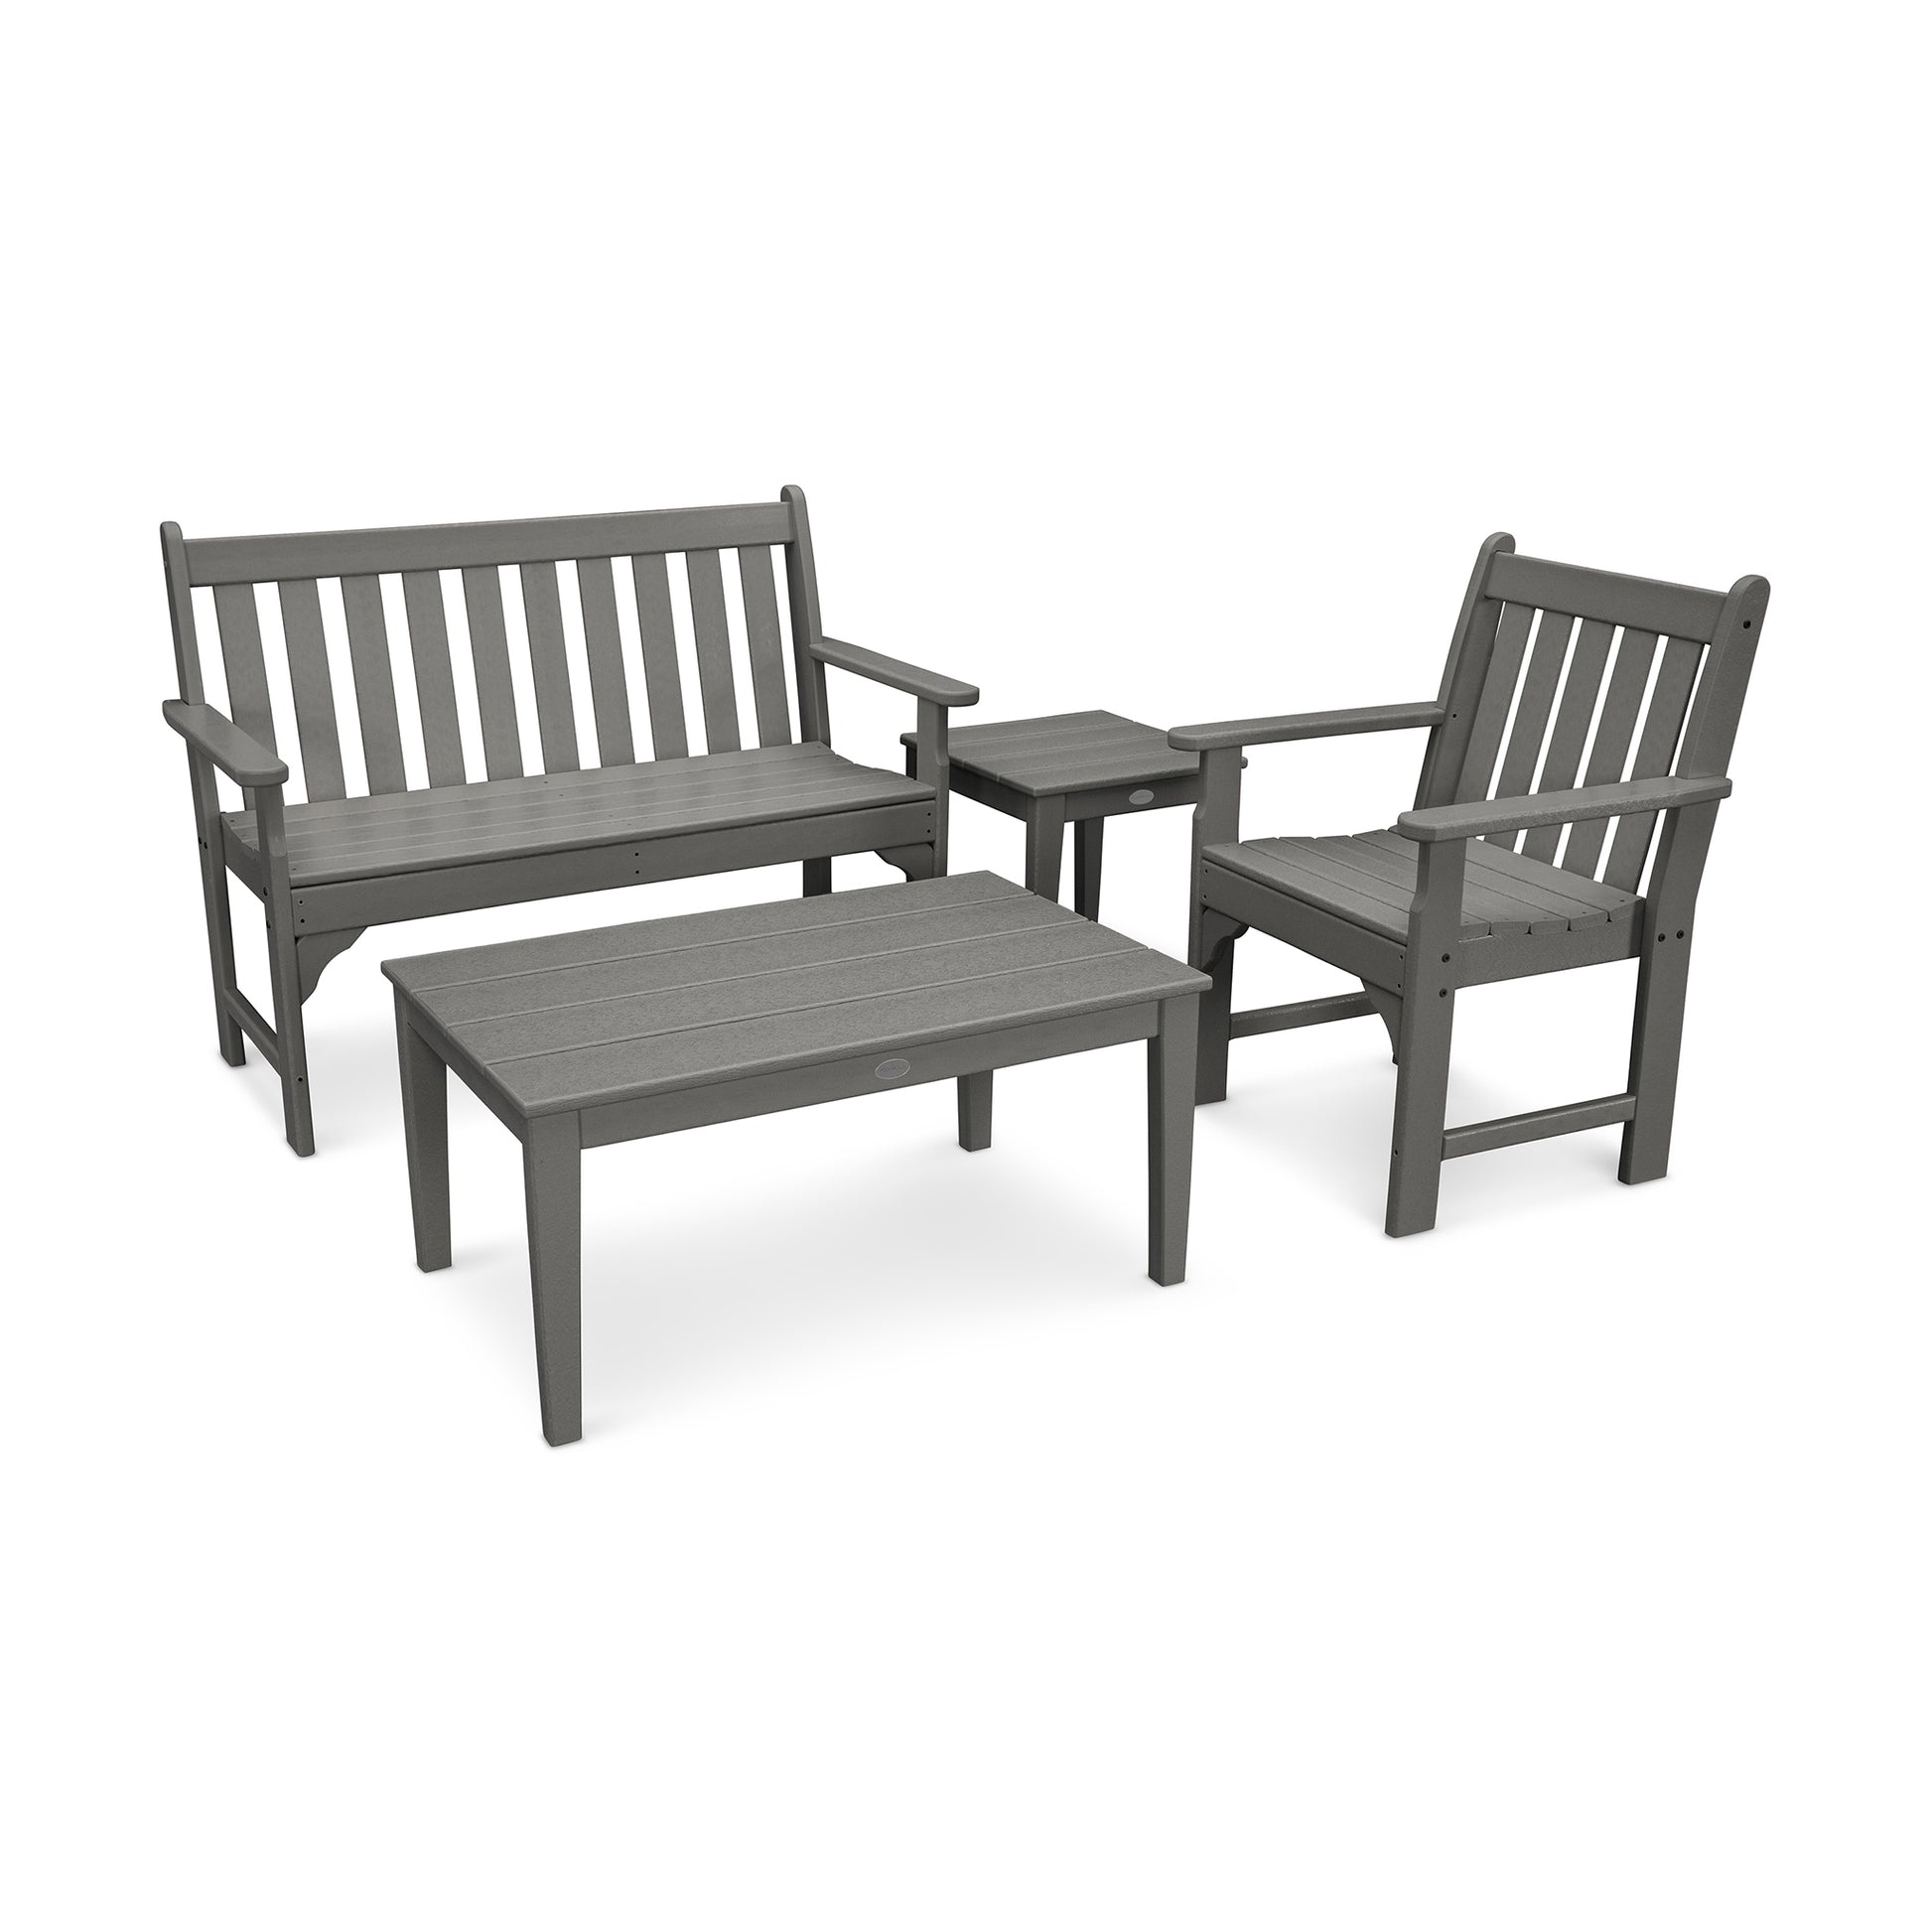 A set of POLYWOOD outdoor furniture, featuring a gray two-seater bench, two single chairs, and a matching rectangular coffee table, all made of synthetic material on an isolated white background.